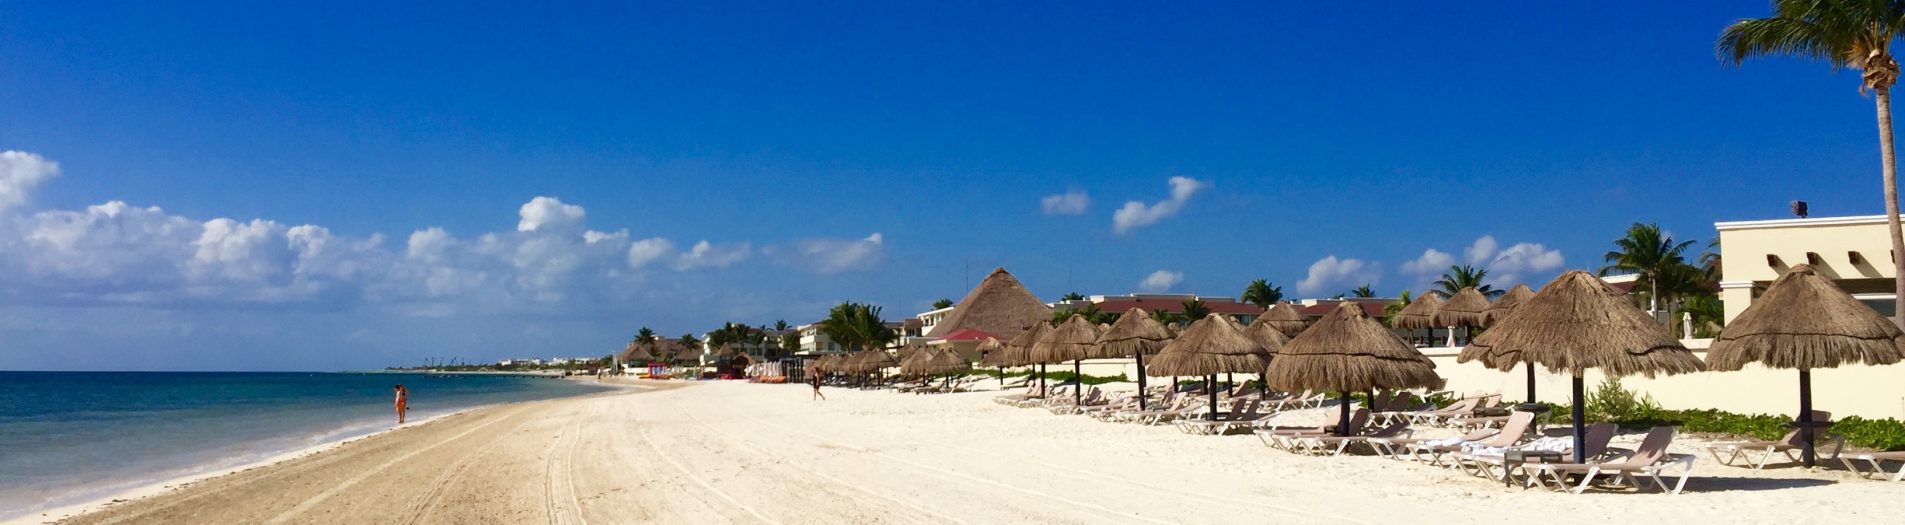 Kids Don’t Outgrow Free! At Moon Palace Cancun Your Kiddos Stay Free!